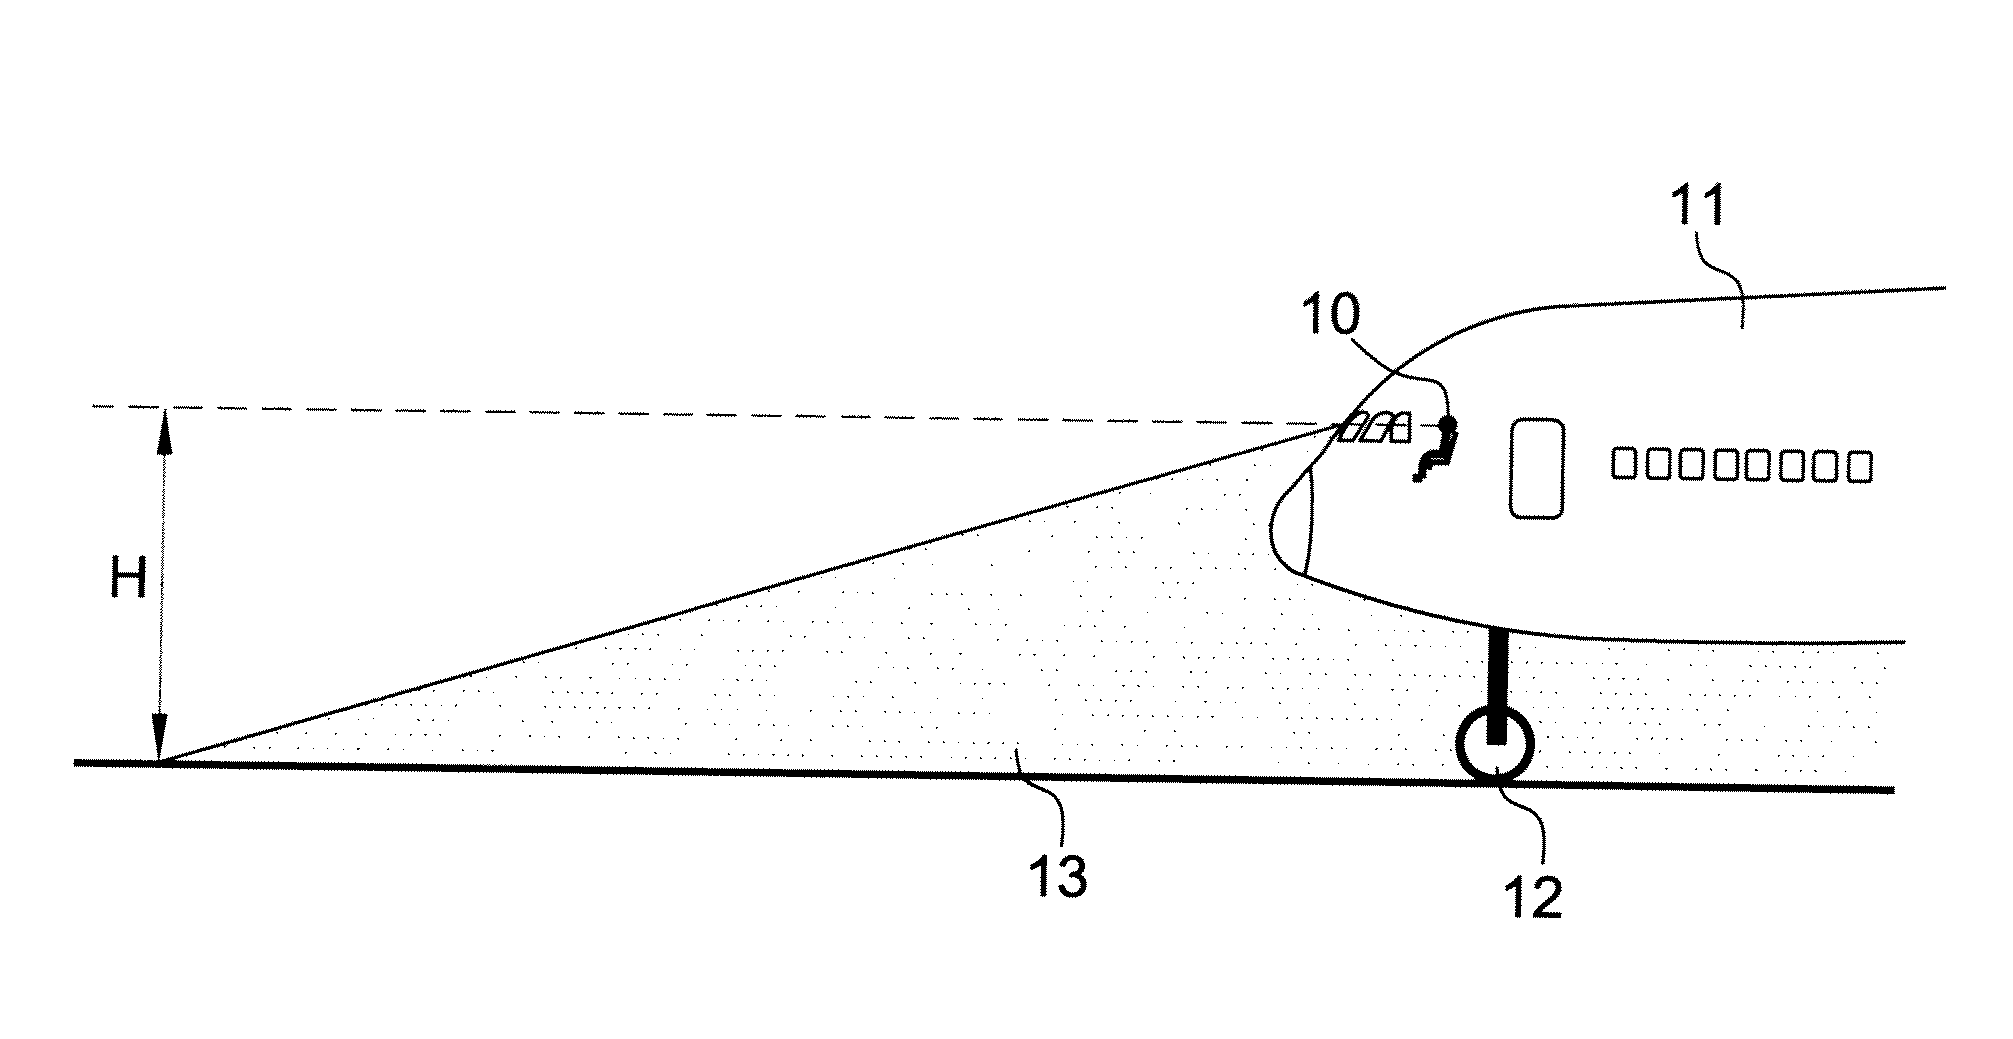 Guiding and taxiing assistance optoelectronic device for an aircraft having a dedicated symbology